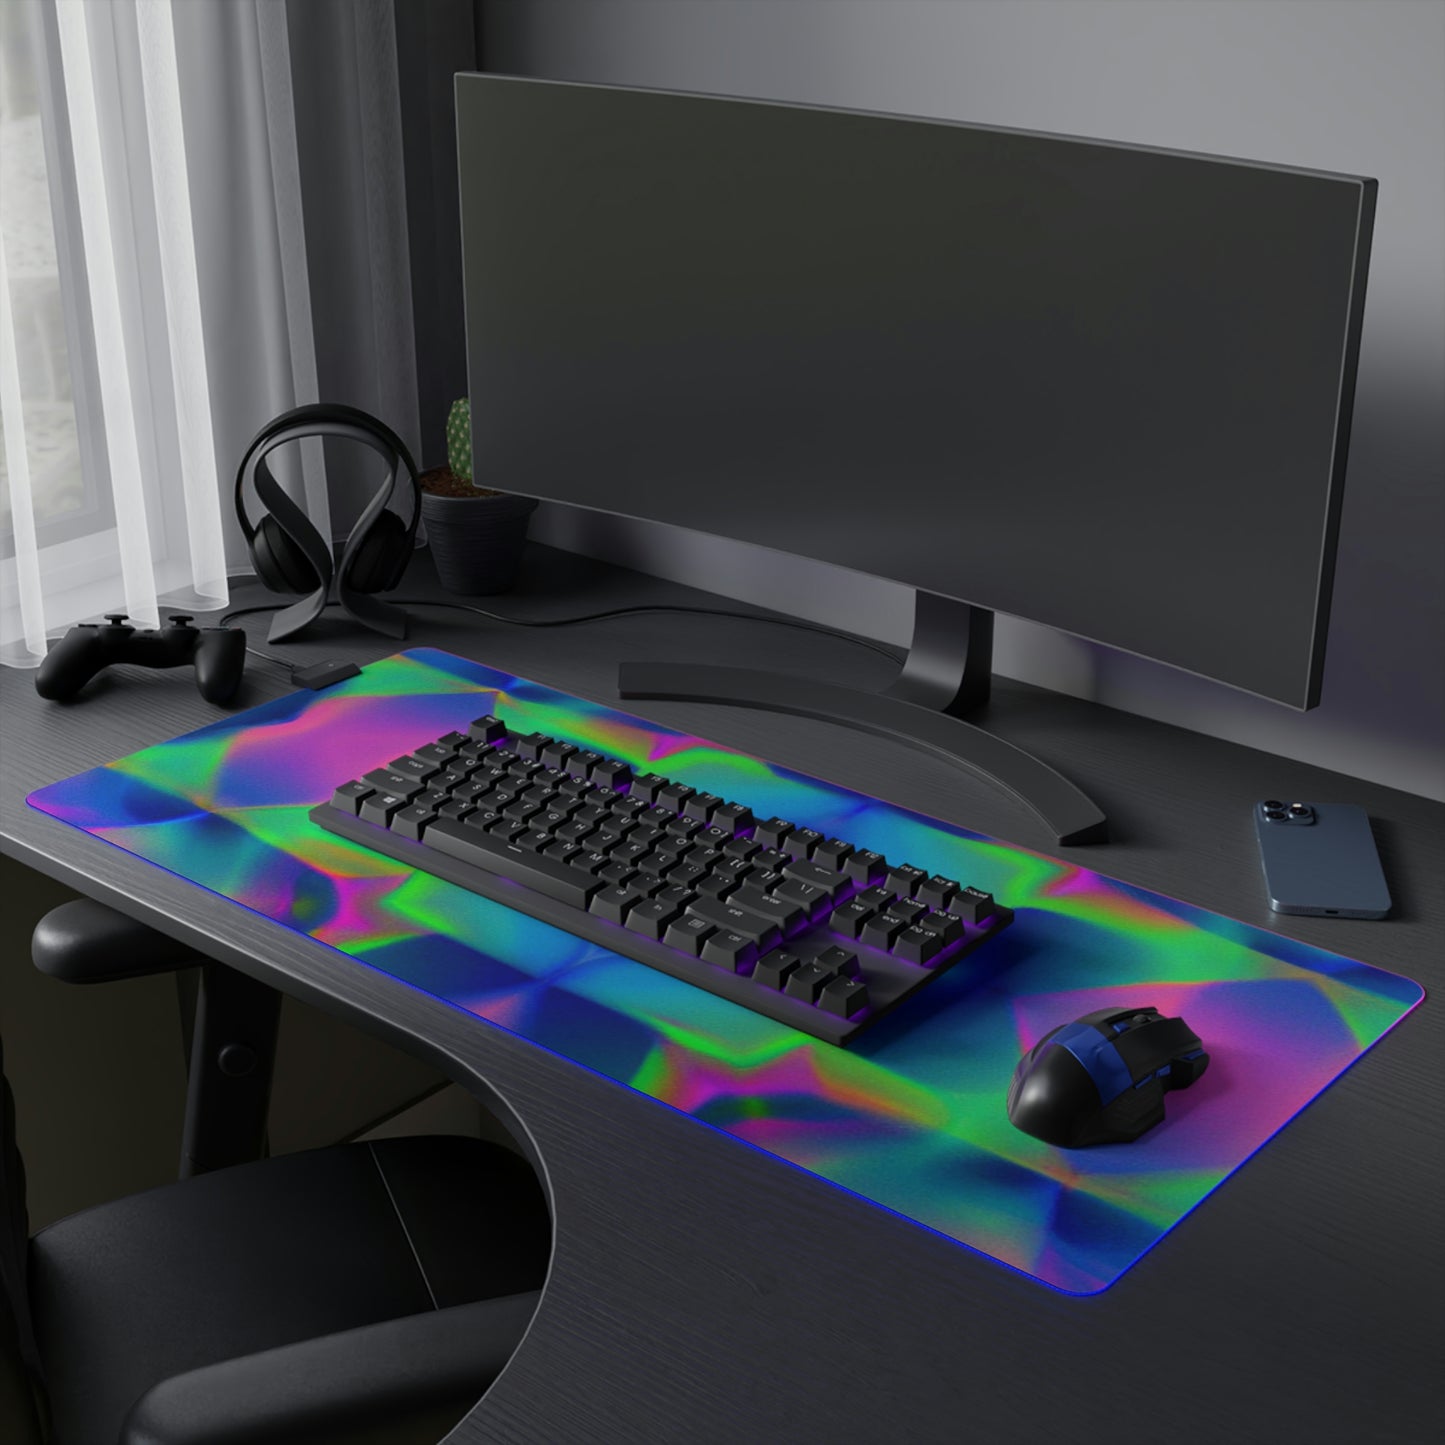 Thea Rockabelly - Psychedelic Trippy LED Light Up Gaming Mouse Pad